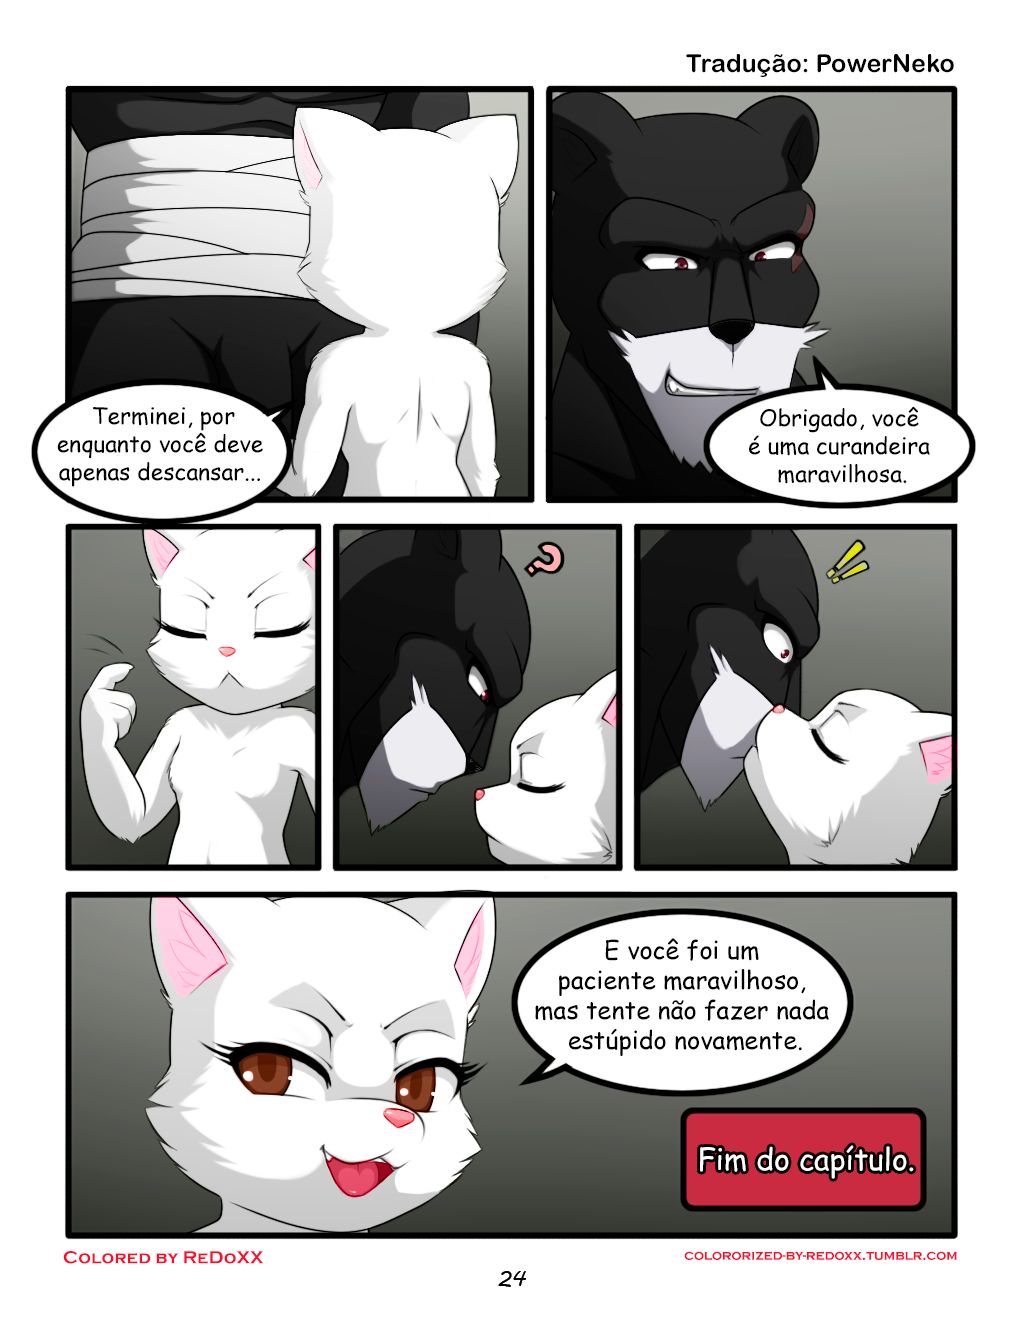 [Darkmirage]Size Counts (O Tamanho Importa) [Colorized by ReDoXX] [Portuguese-BR] [Translated by PowerNeko] 25